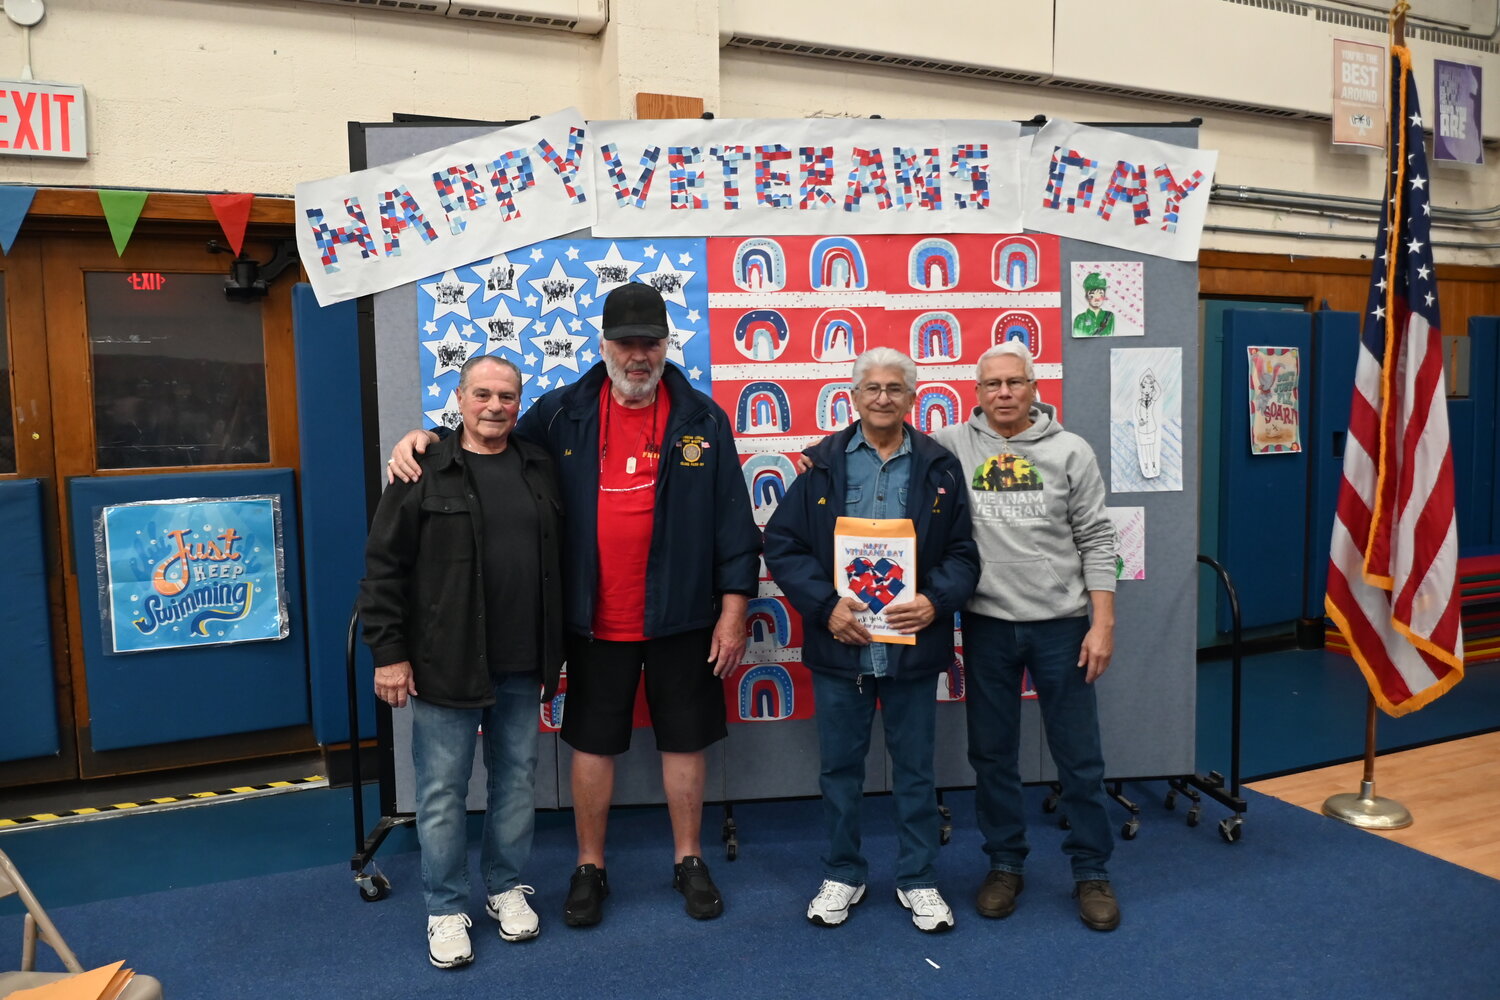 Local vets enjoyed the Veterans Day activities.